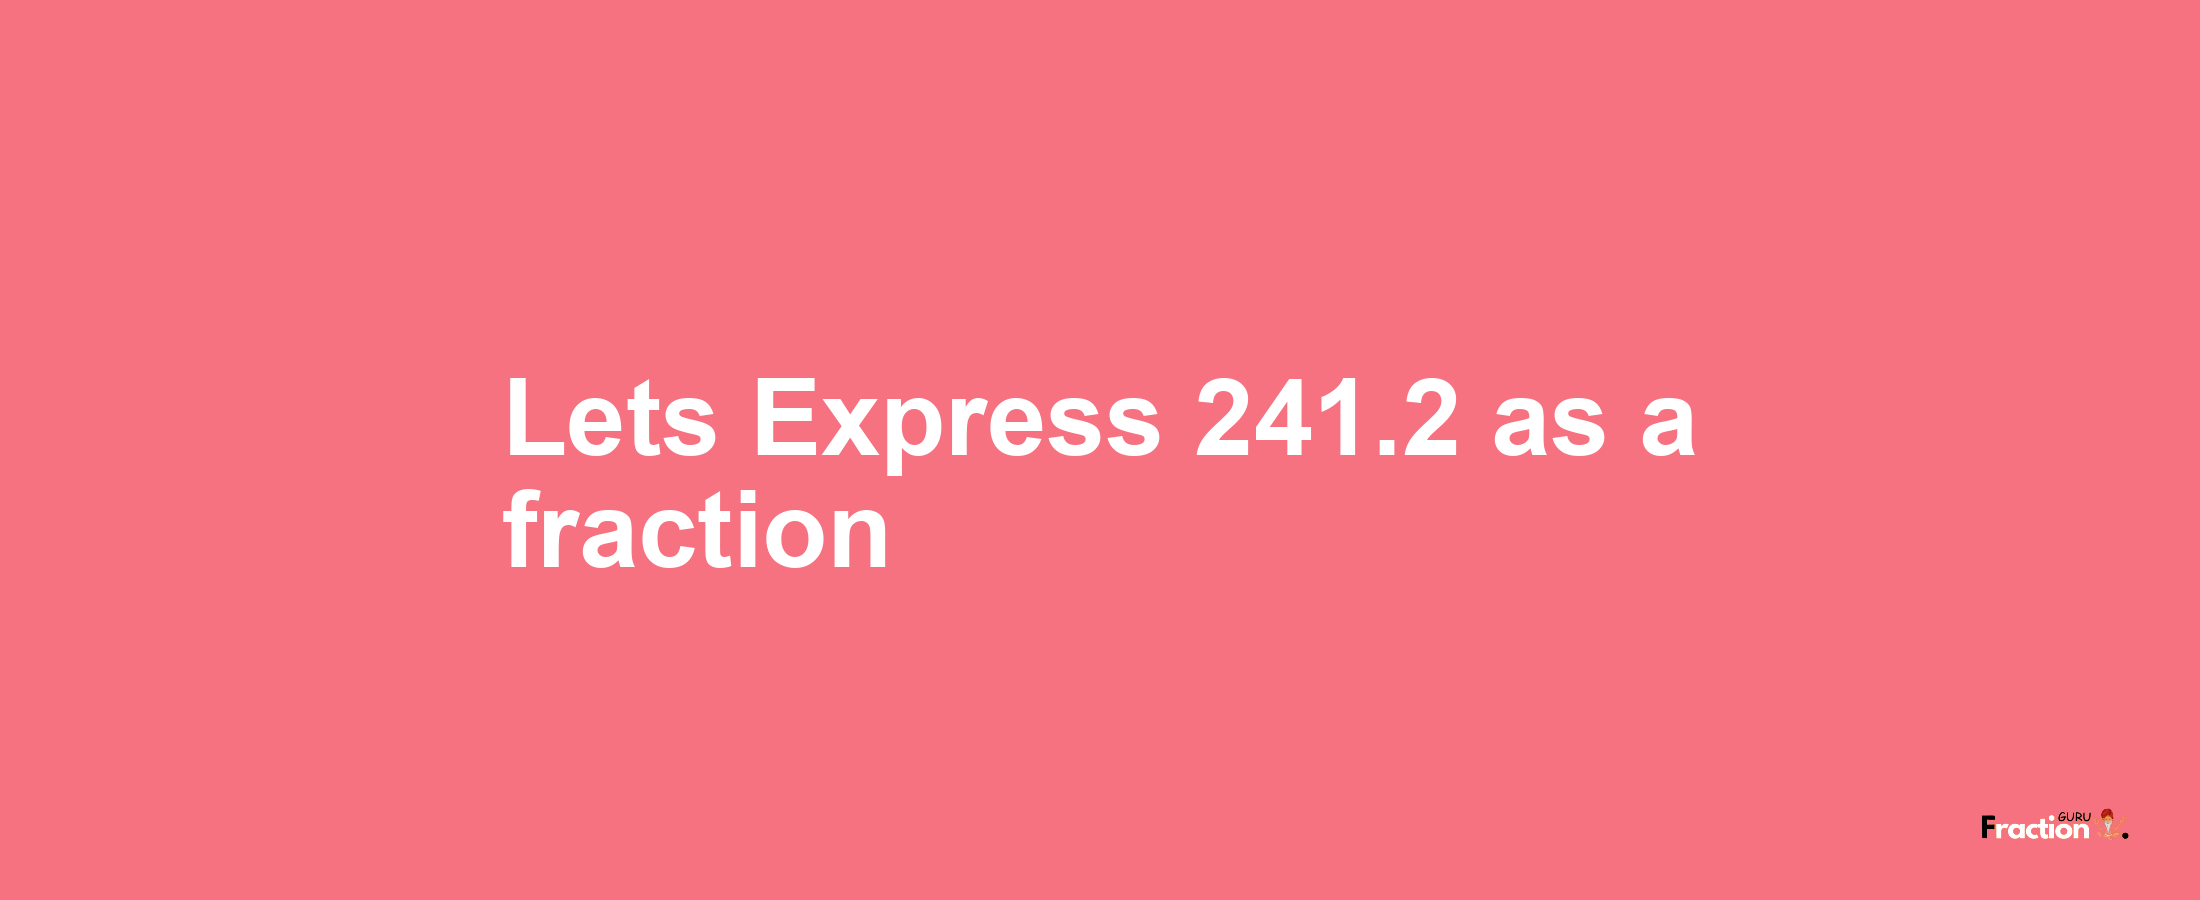 Lets Express 241.2 as afraction